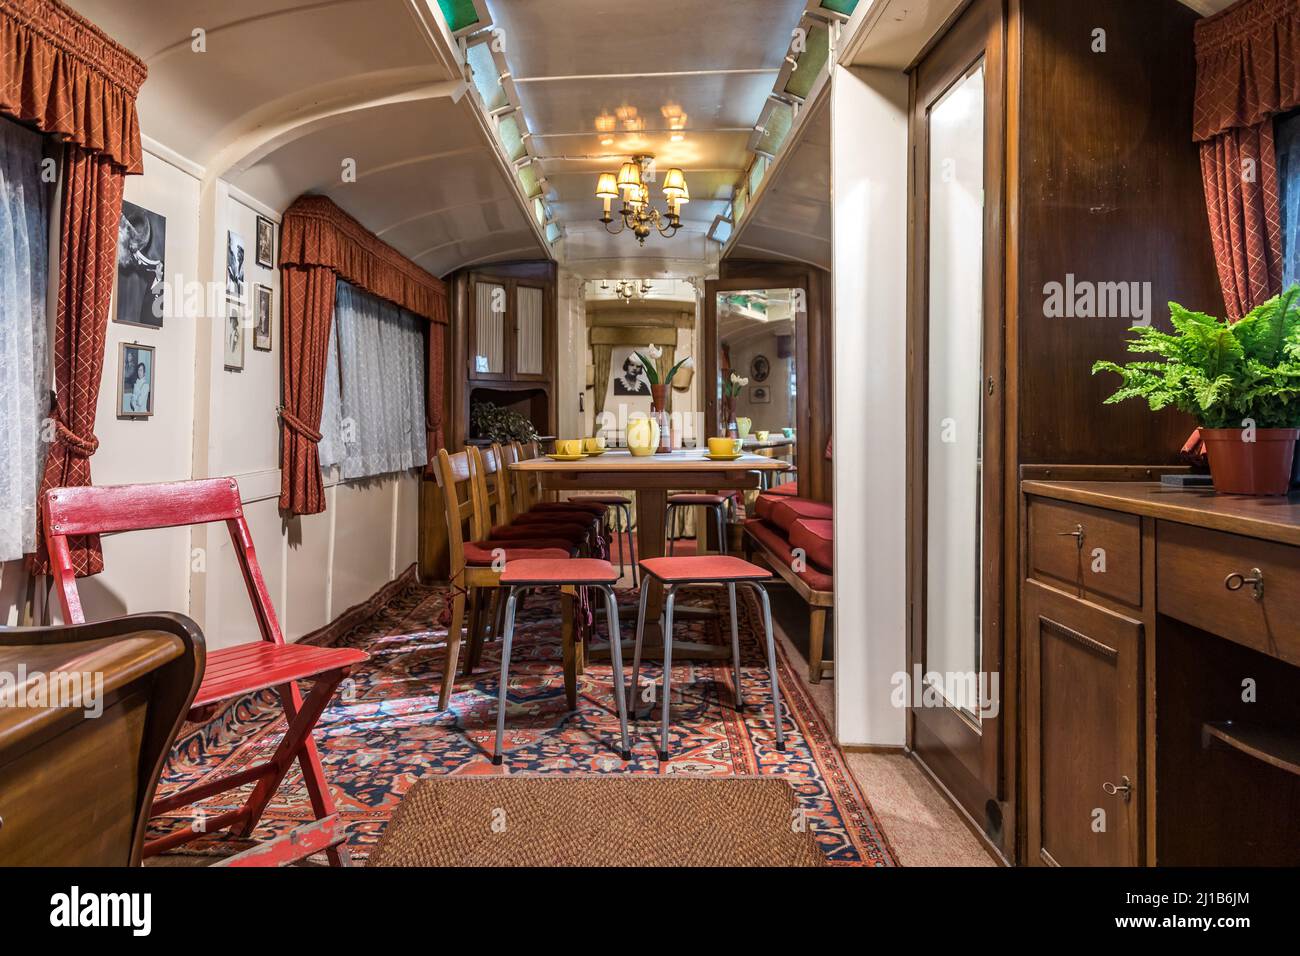 RAILWAY CARRIAGE CONVERTED INTO A CARAVAN FOR THE KNIE CIRCUS AND USED BETWEEN 1919 AND 1974, PAVILION DEDICATED TO THE HISTORY OF THE TRAIN, VERKEHRSHAUS DES SCHWEIZ, LUCERNE, CANTON OF LUCERNE, SWITZERLAND Stock Photo